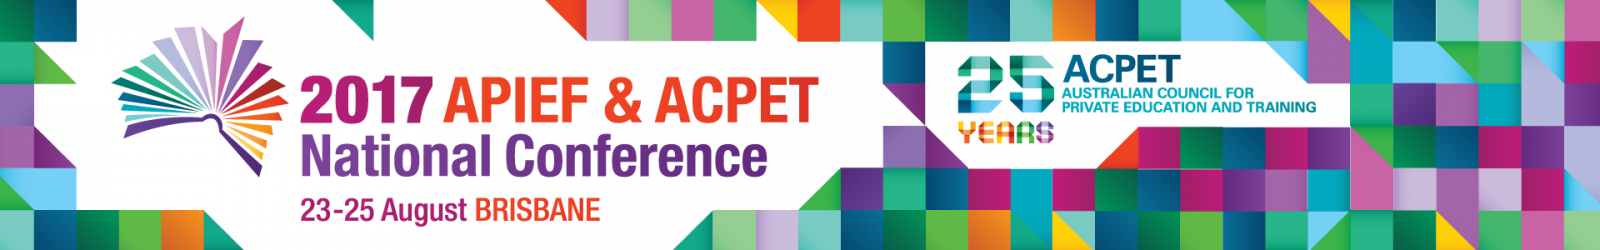 ACPET National Conference 24-25 August in Brisbane